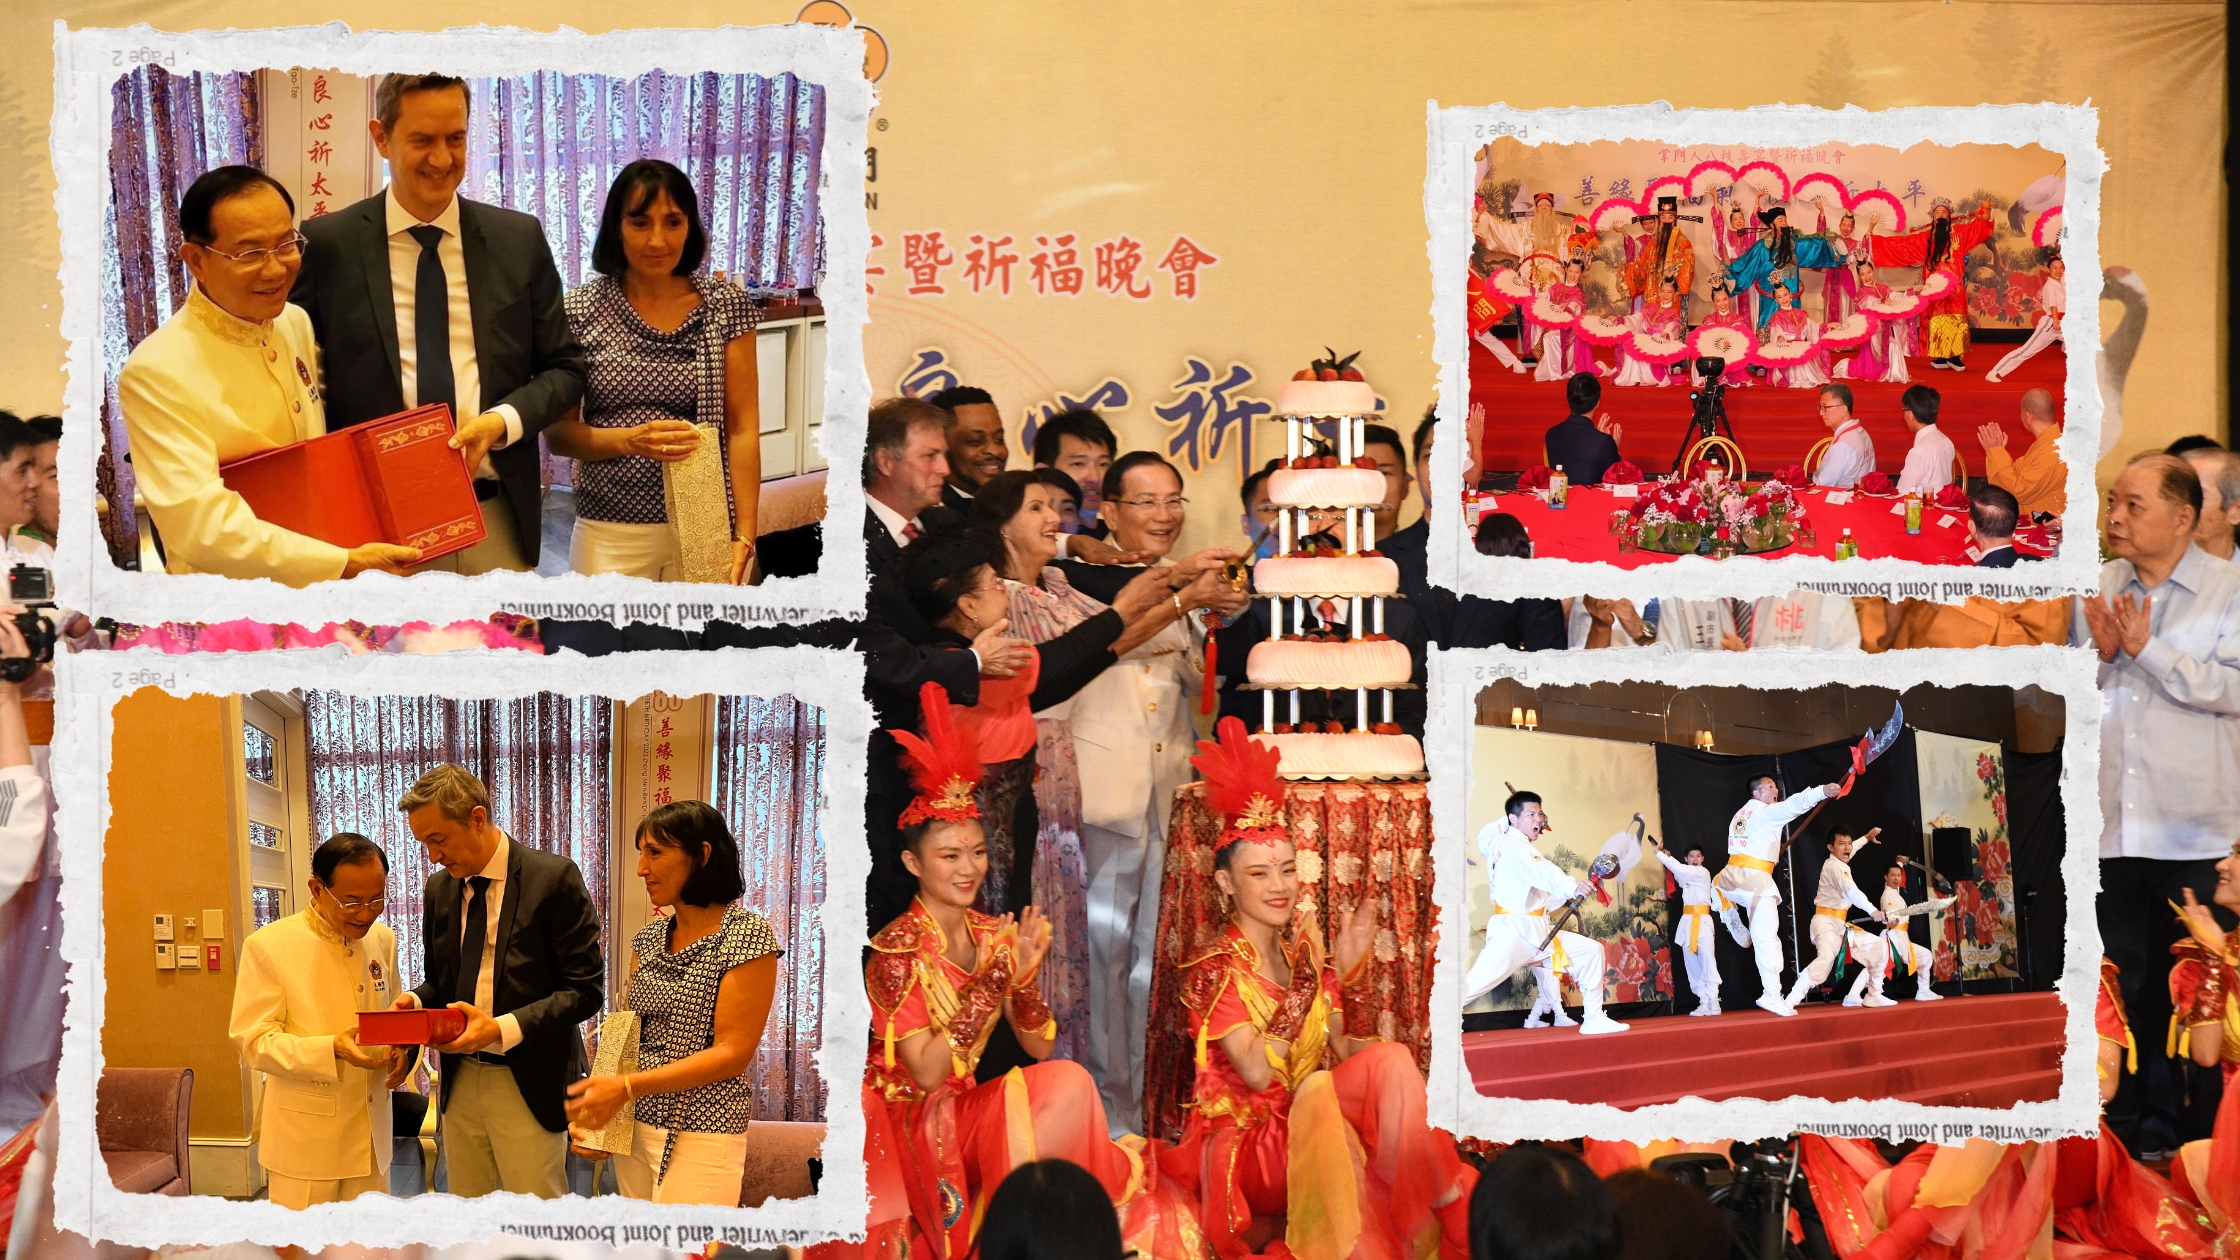 Collage photos of 80th Anniversary Dr. Hong from Tai Ji Men, and Eric Roux presenting him special edition of Dianetics